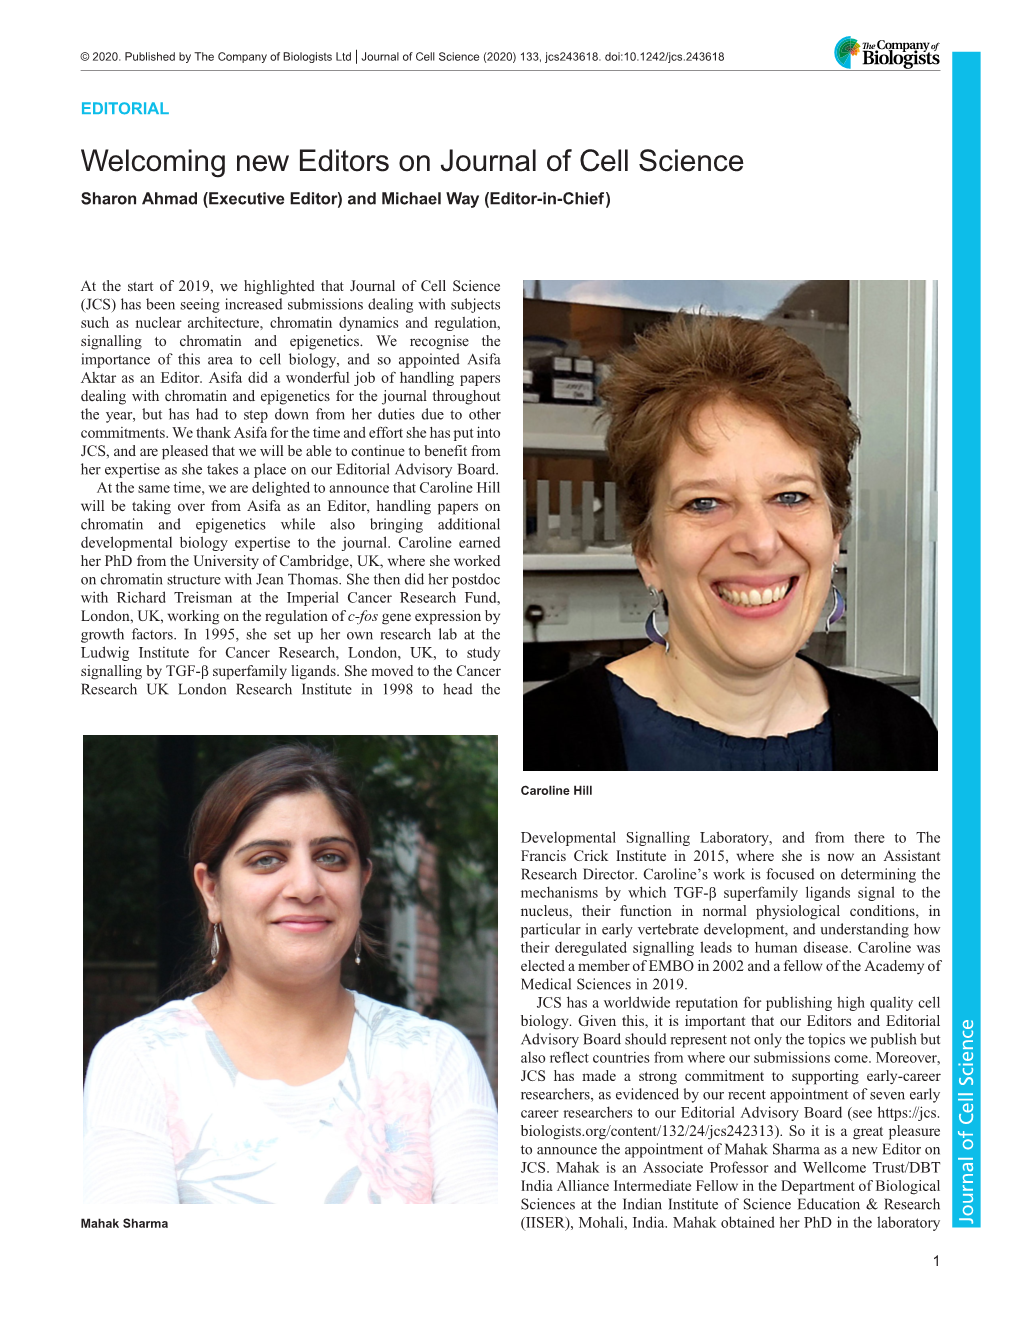 Welcoming New Editors on Journal of Cell Science Sharon Ahmad (Executive Editor) and Michael Way (Editor-In-Chief)